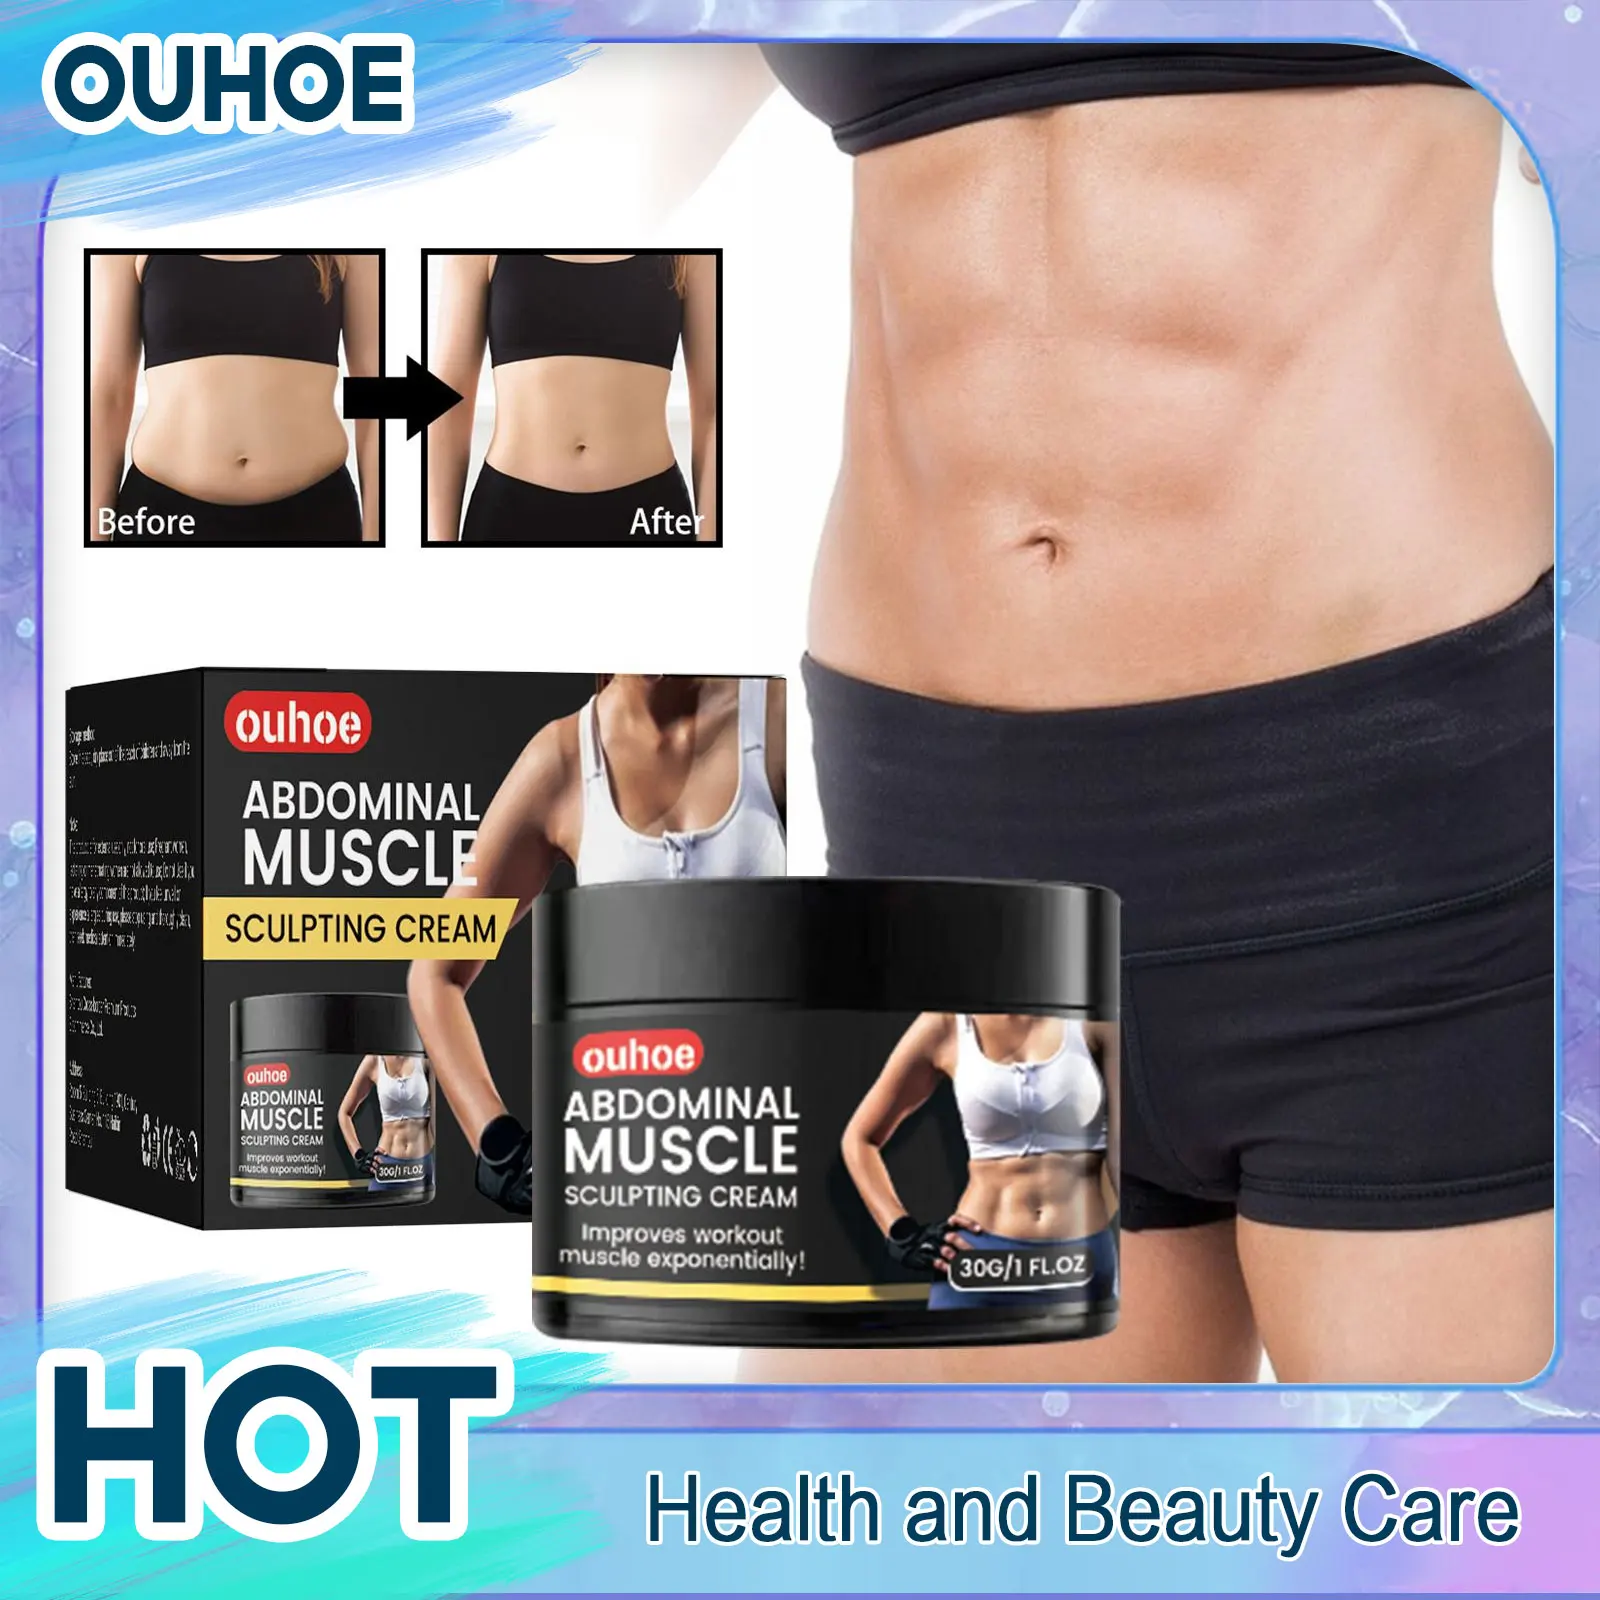 Belly Fat Burner Cream Weight Loss Firming Shaping Waist Lines Fitness Abdominal Muscle Flat Tummy Anti Cellulite Slimming Cream tj tianjun new waist trimmer belt sweat wrap tummy stomach weight loss fat slimming exercise belly body beauty waist support